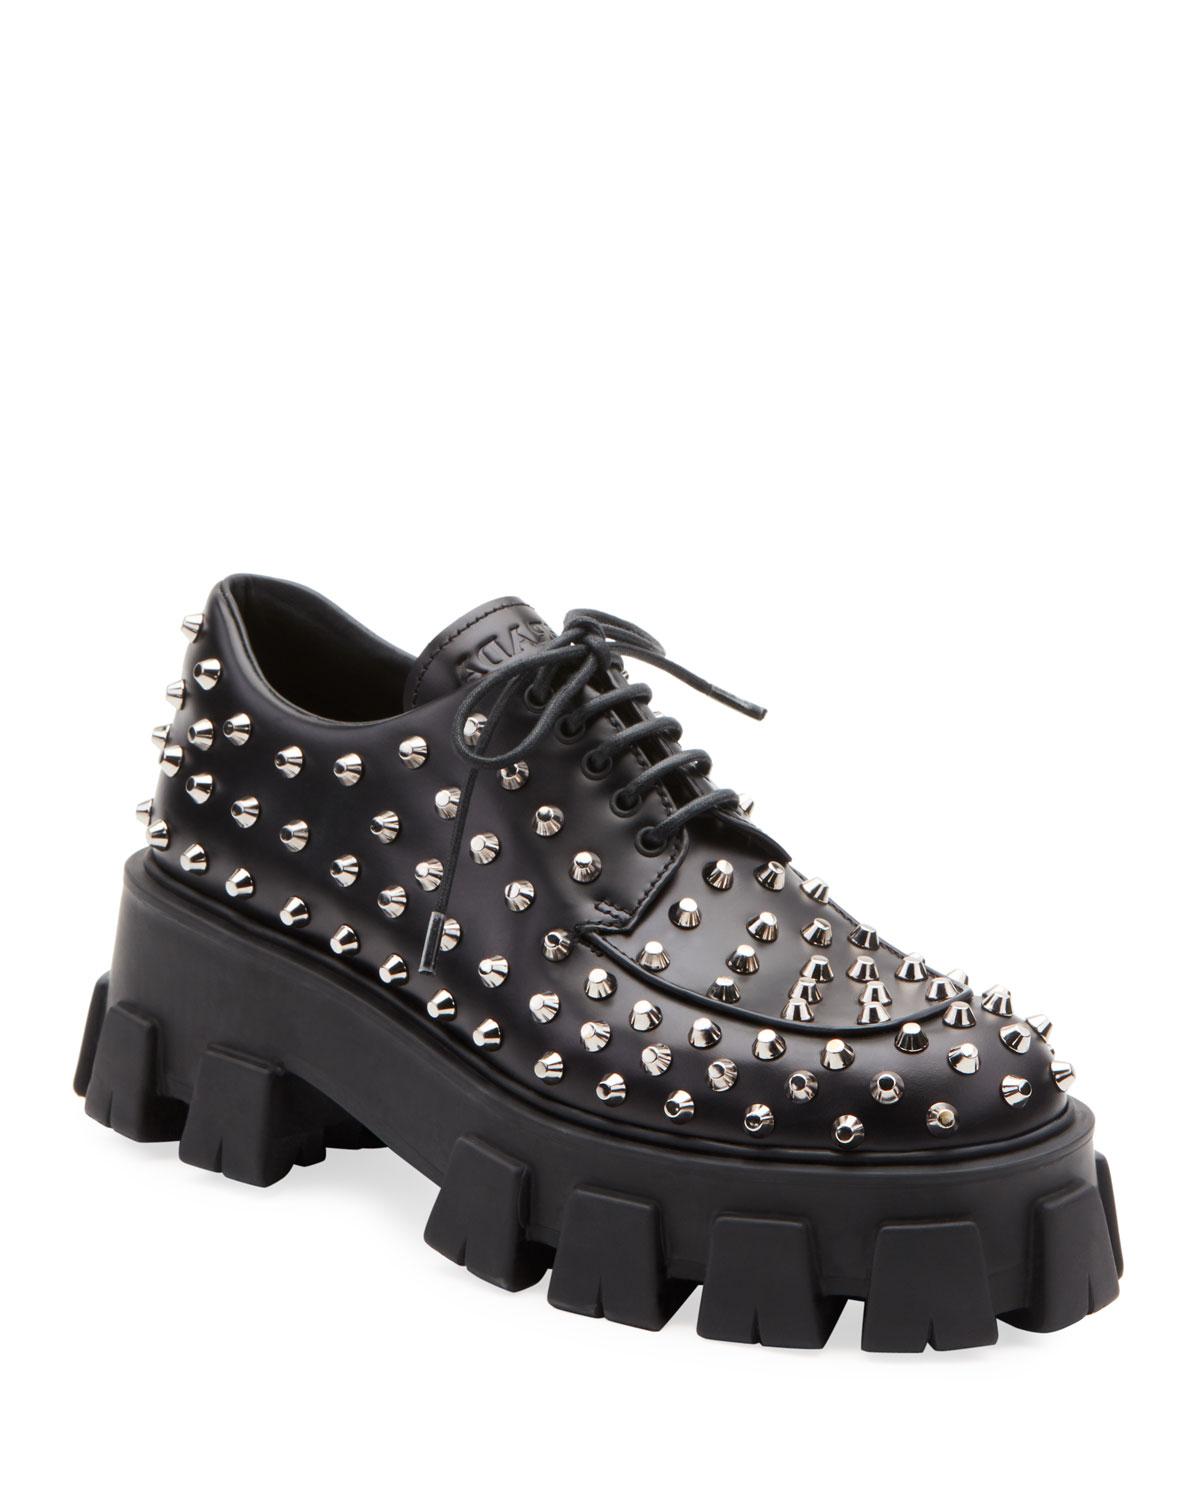 Prada Studded Leather Derby Shoes in Black - Lyst